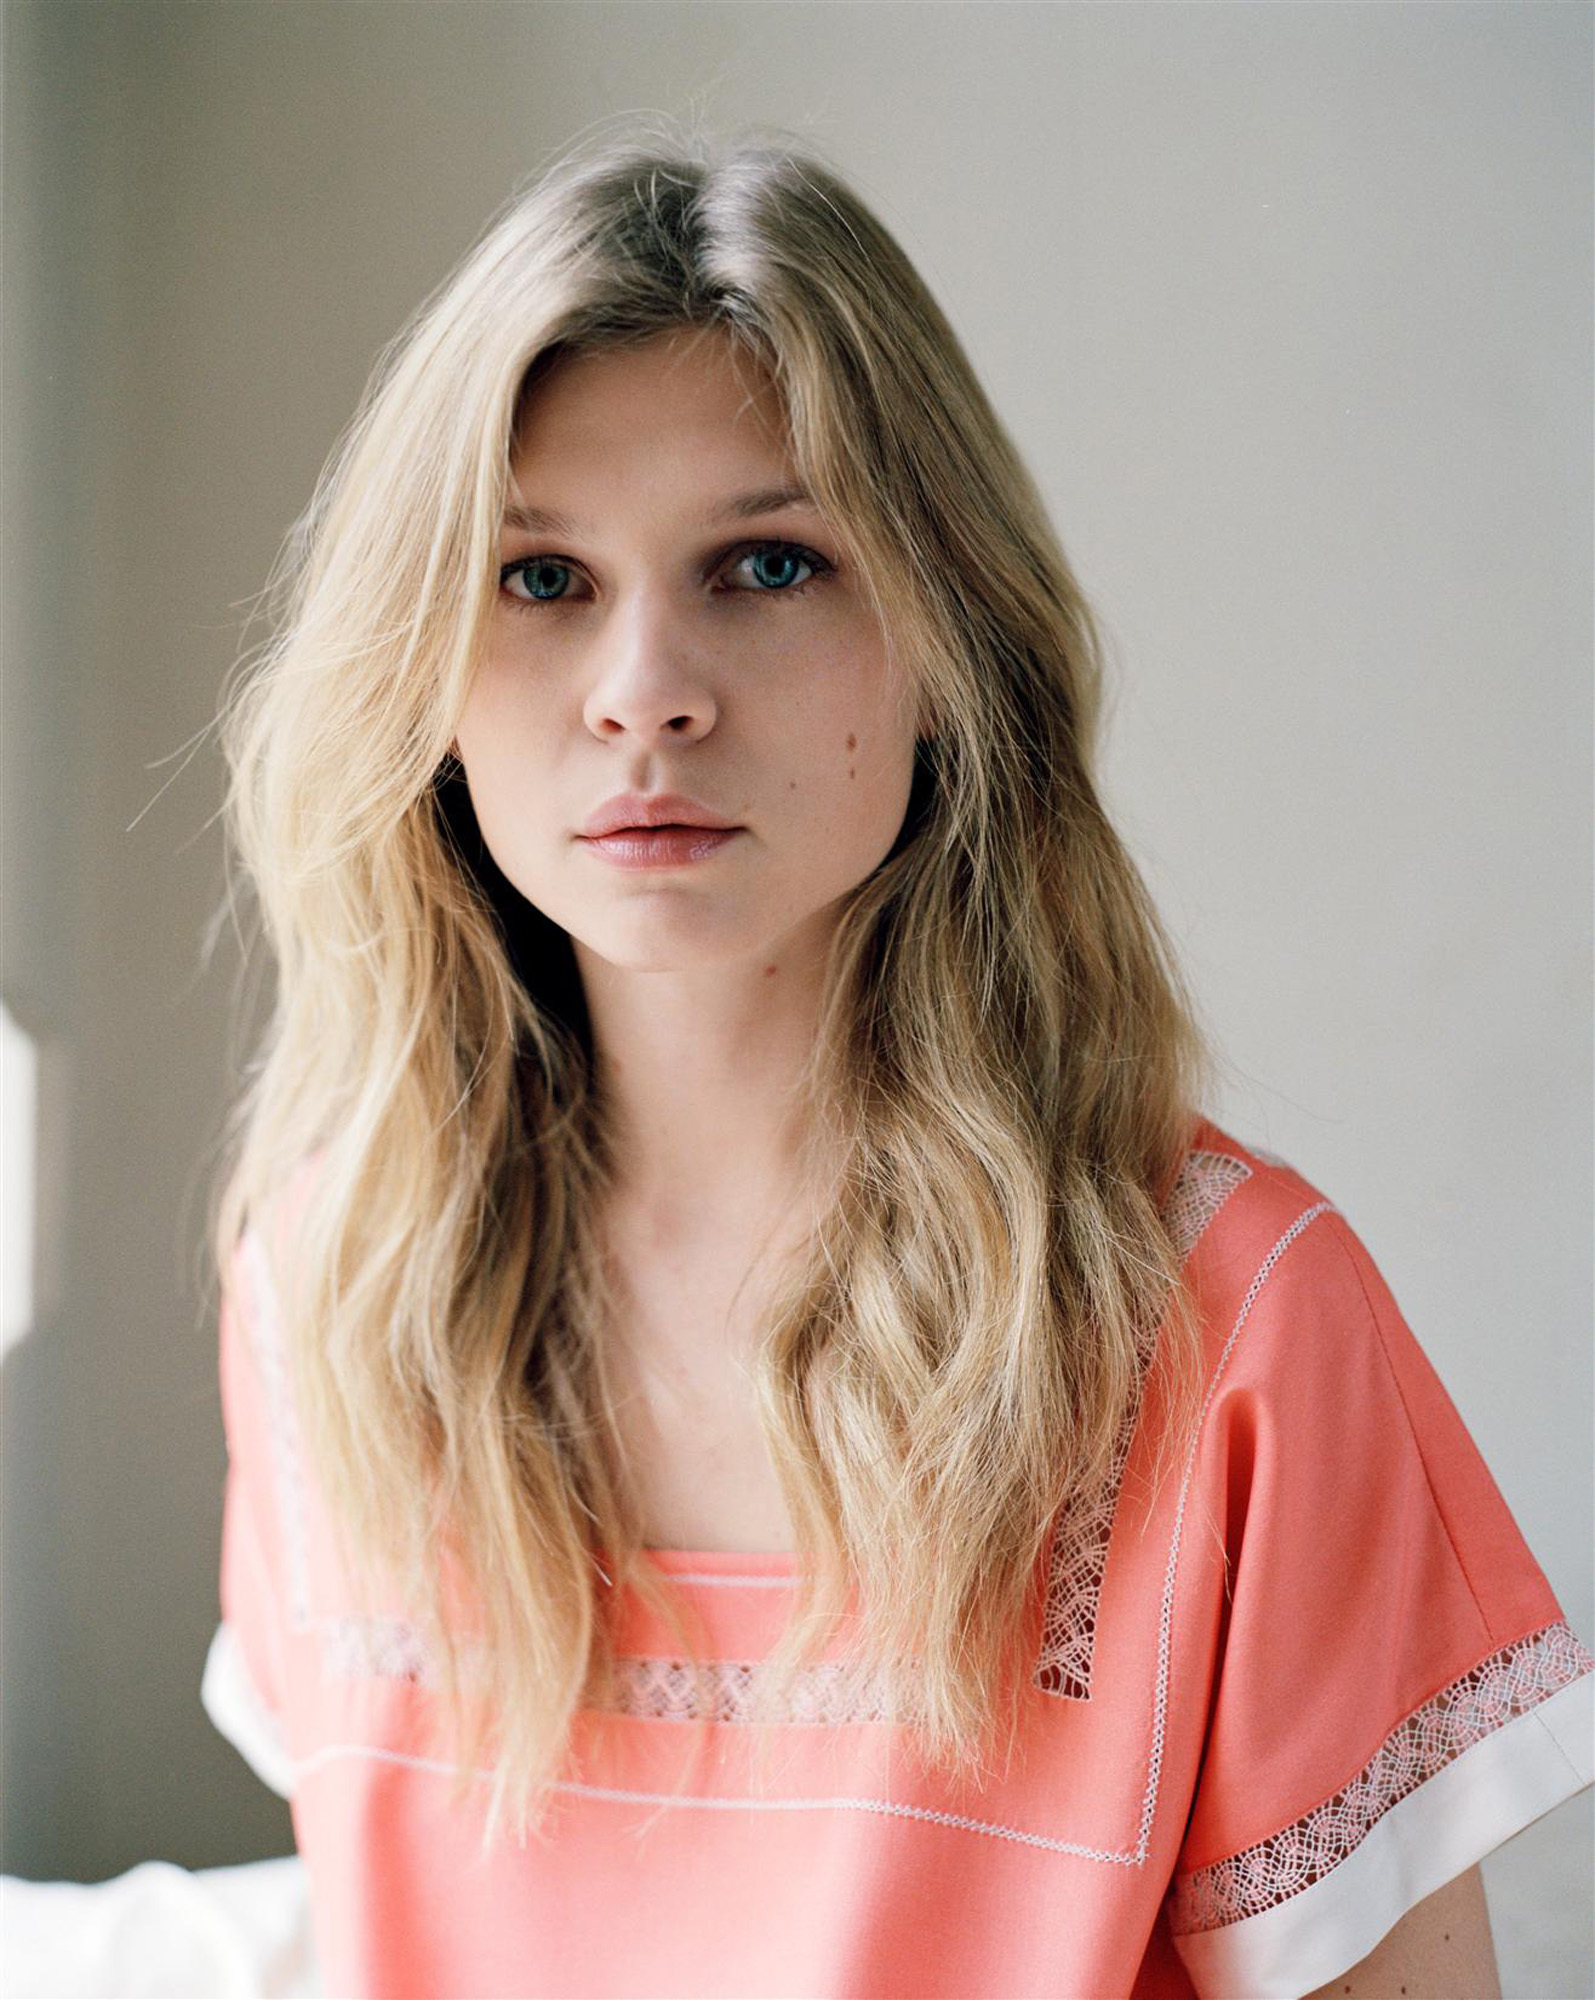 http://images1.fanpop.com/images/photos/1700000/Clemence-Poesy-clemence-poesy-1731415-1595-2000.jpg